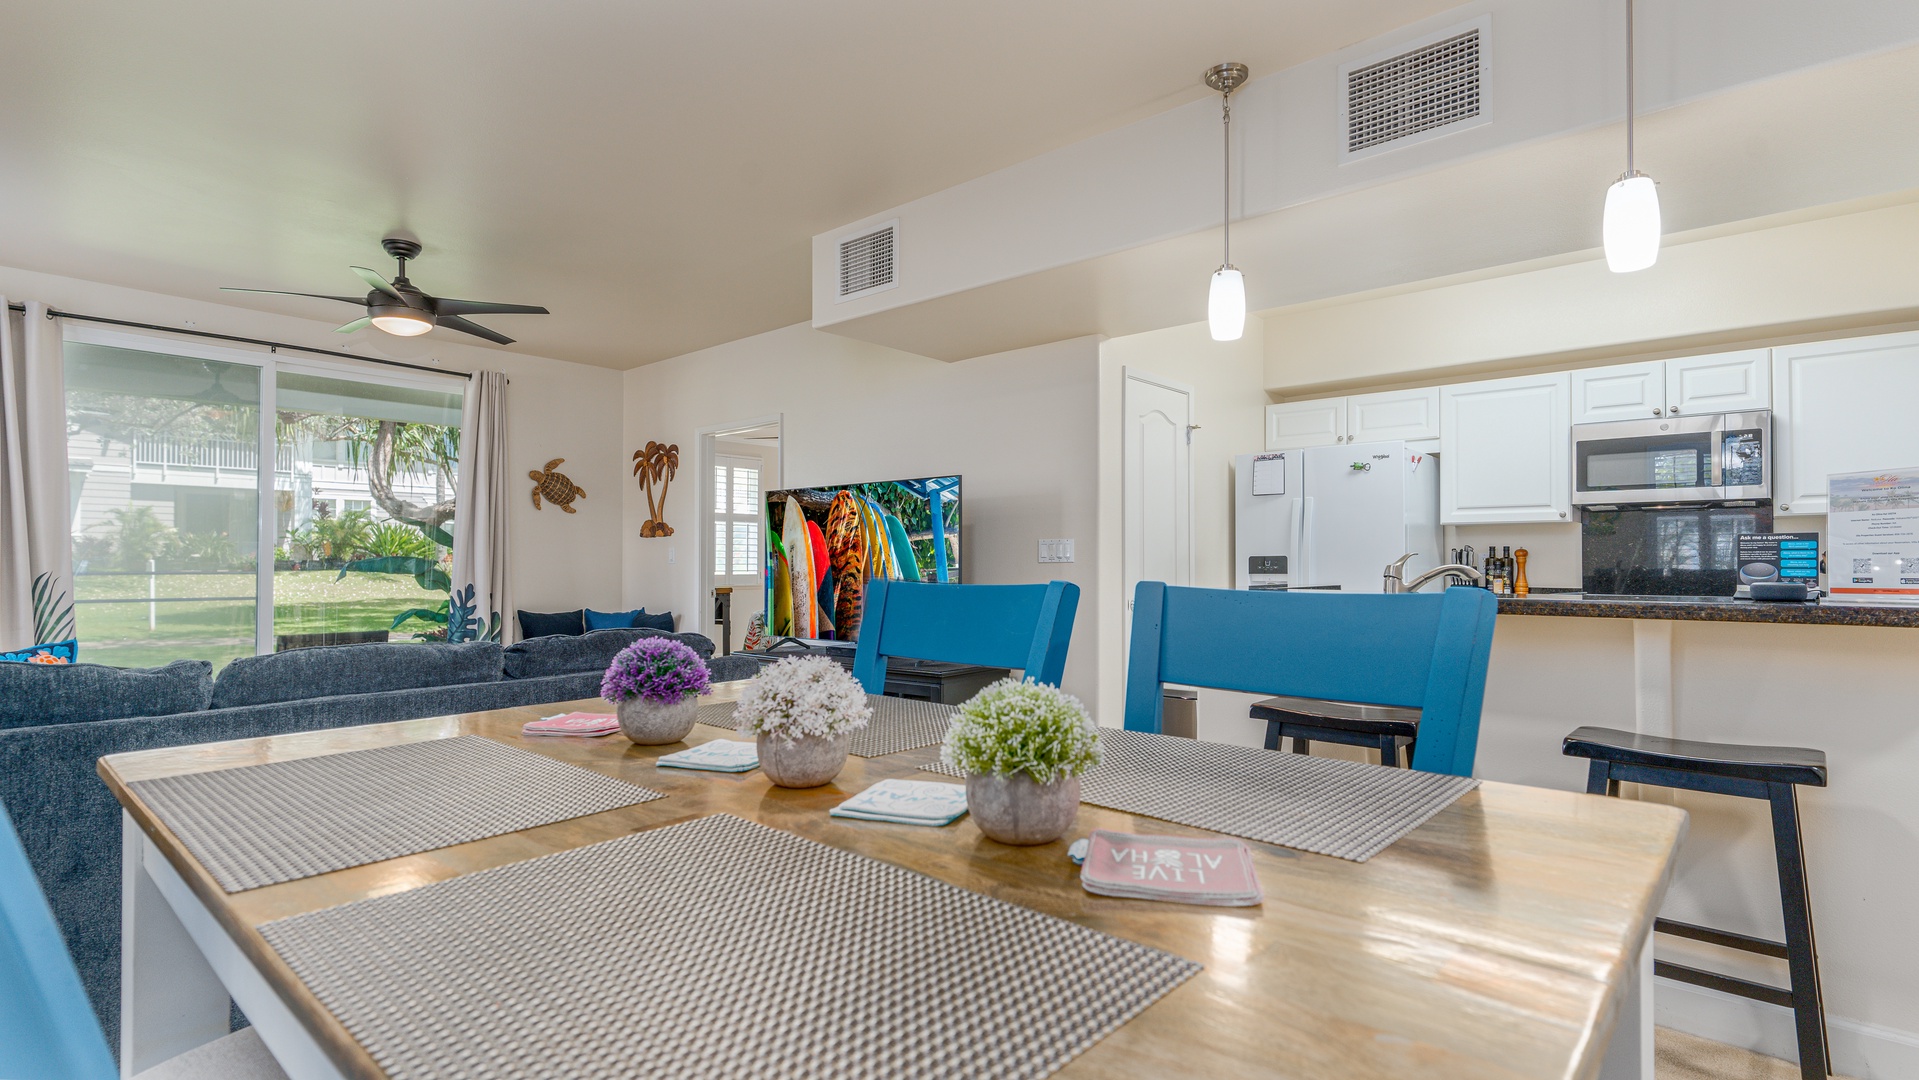 Kapolei Vacation Rentals, Ko Olina Kai 1027A - Welcome to the bright sunny kitchen area with breakfast bar seating.